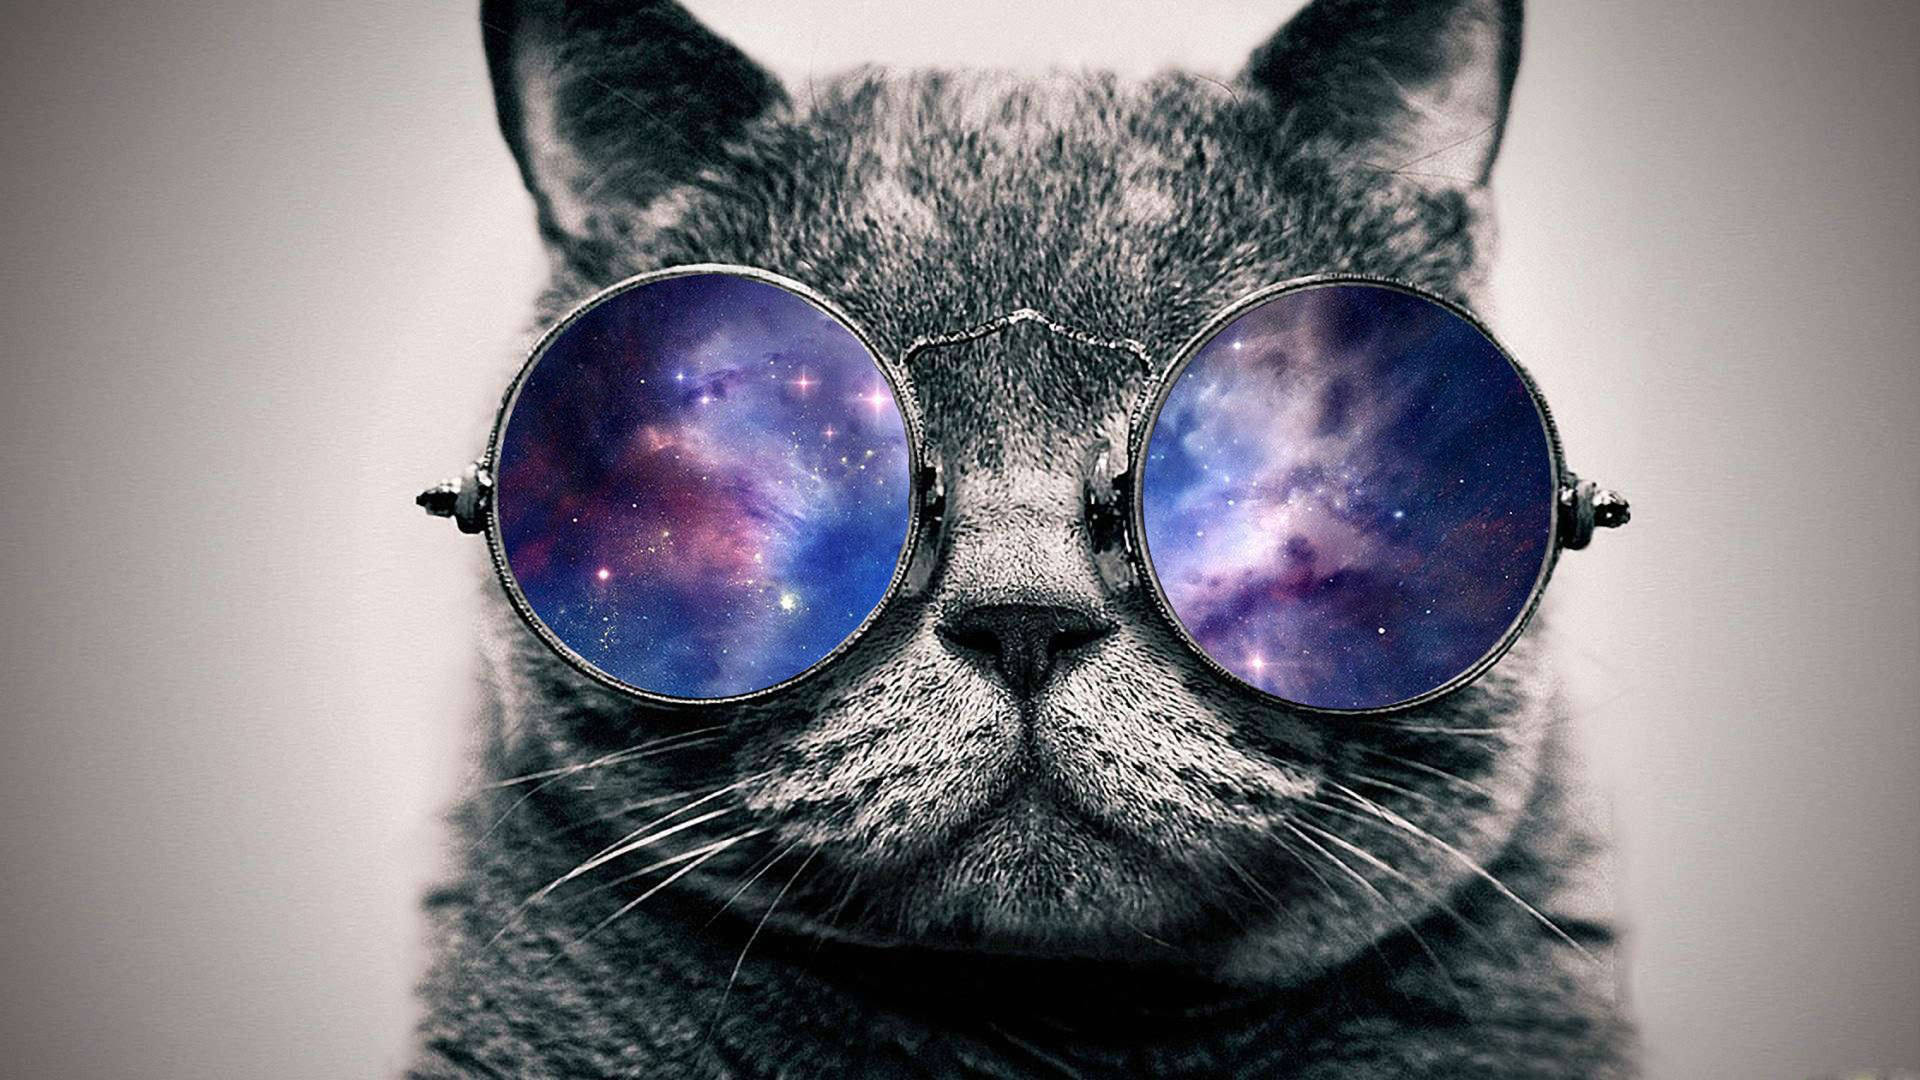 Cool Cat donned in Galaxy Glasses Wallpaper